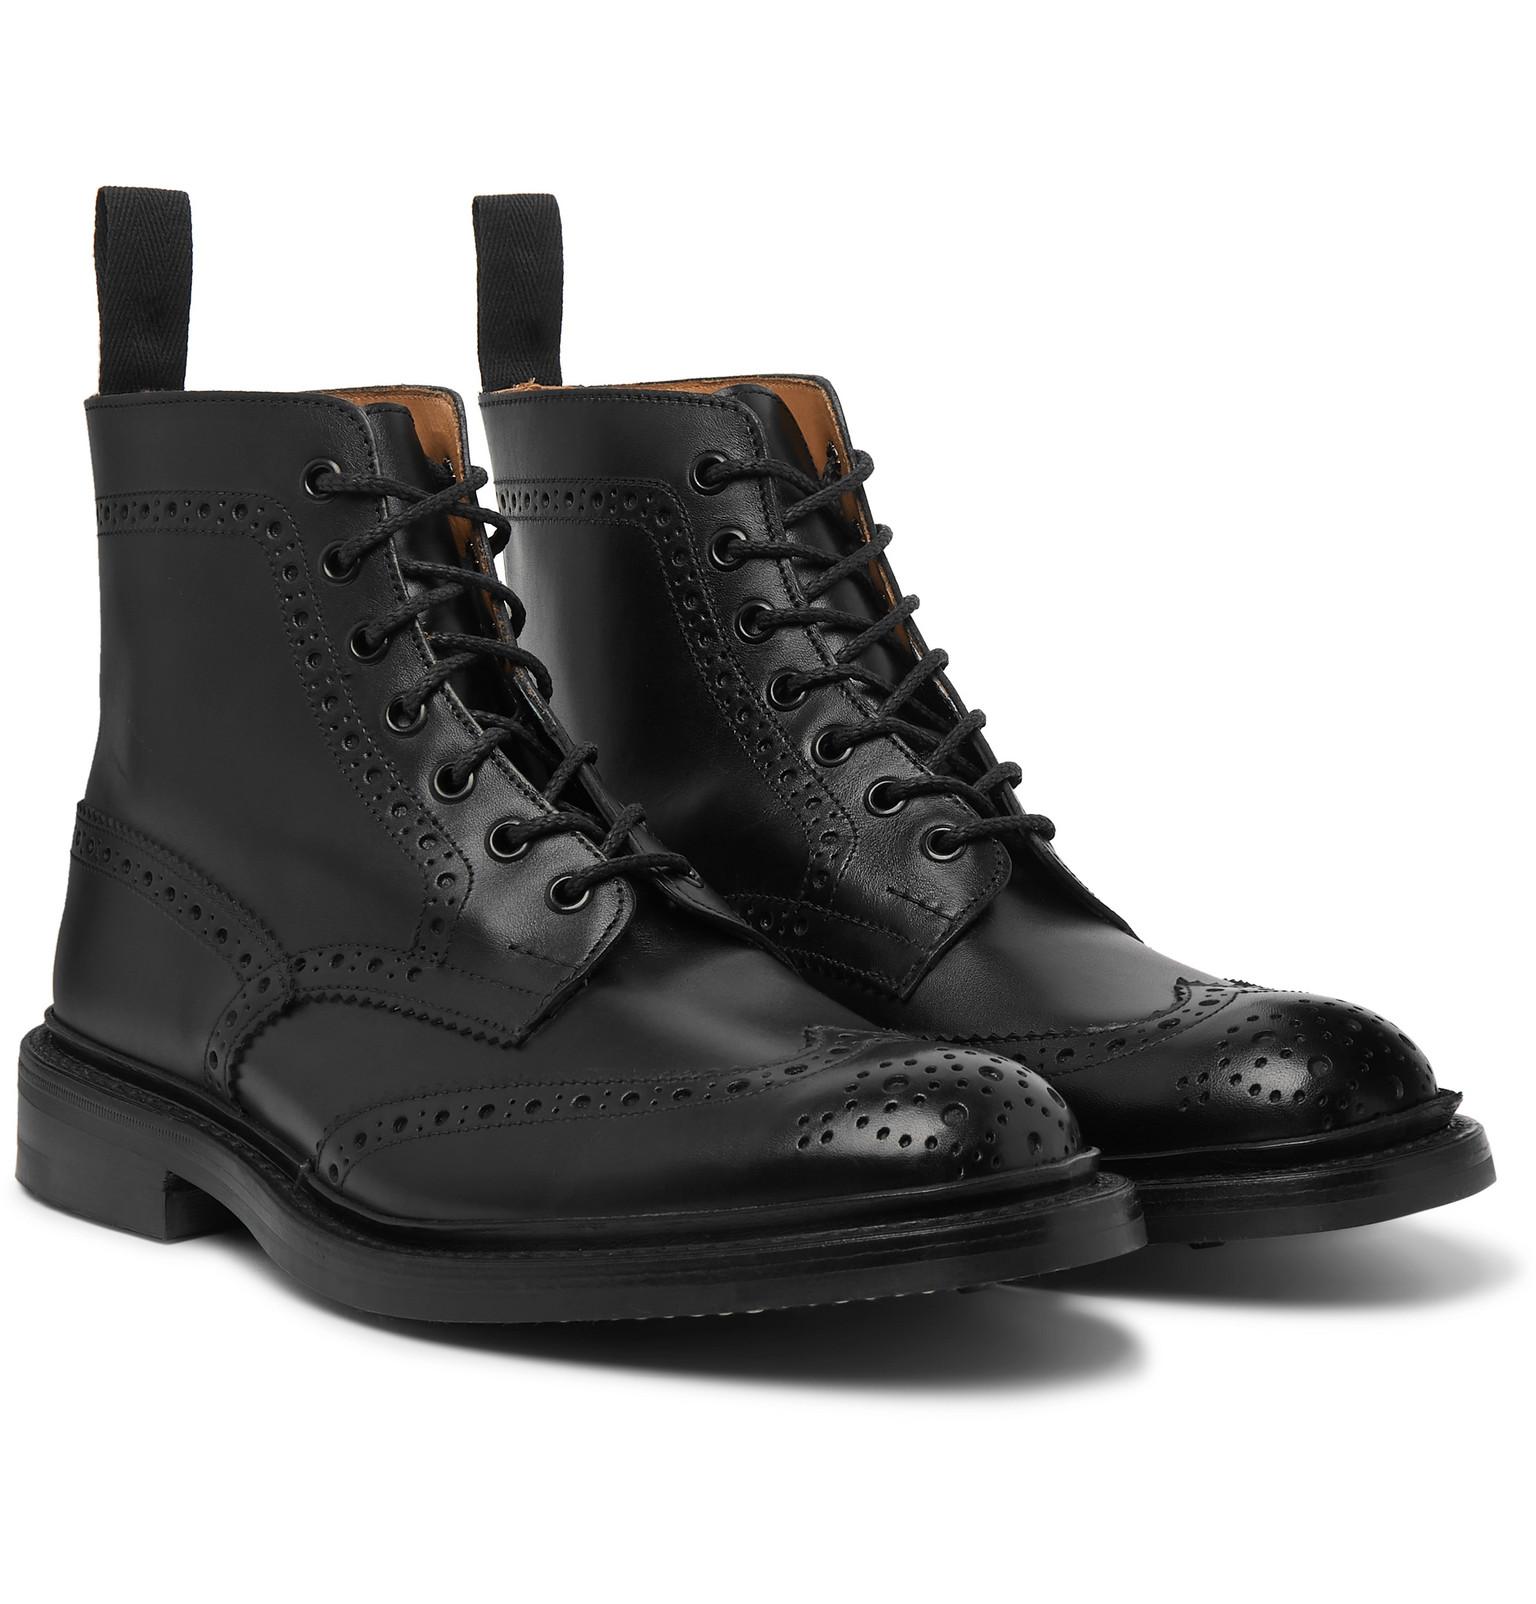 Tricker's Stow Full-grain Leather Brogue Boots in Black for Men - Lyst